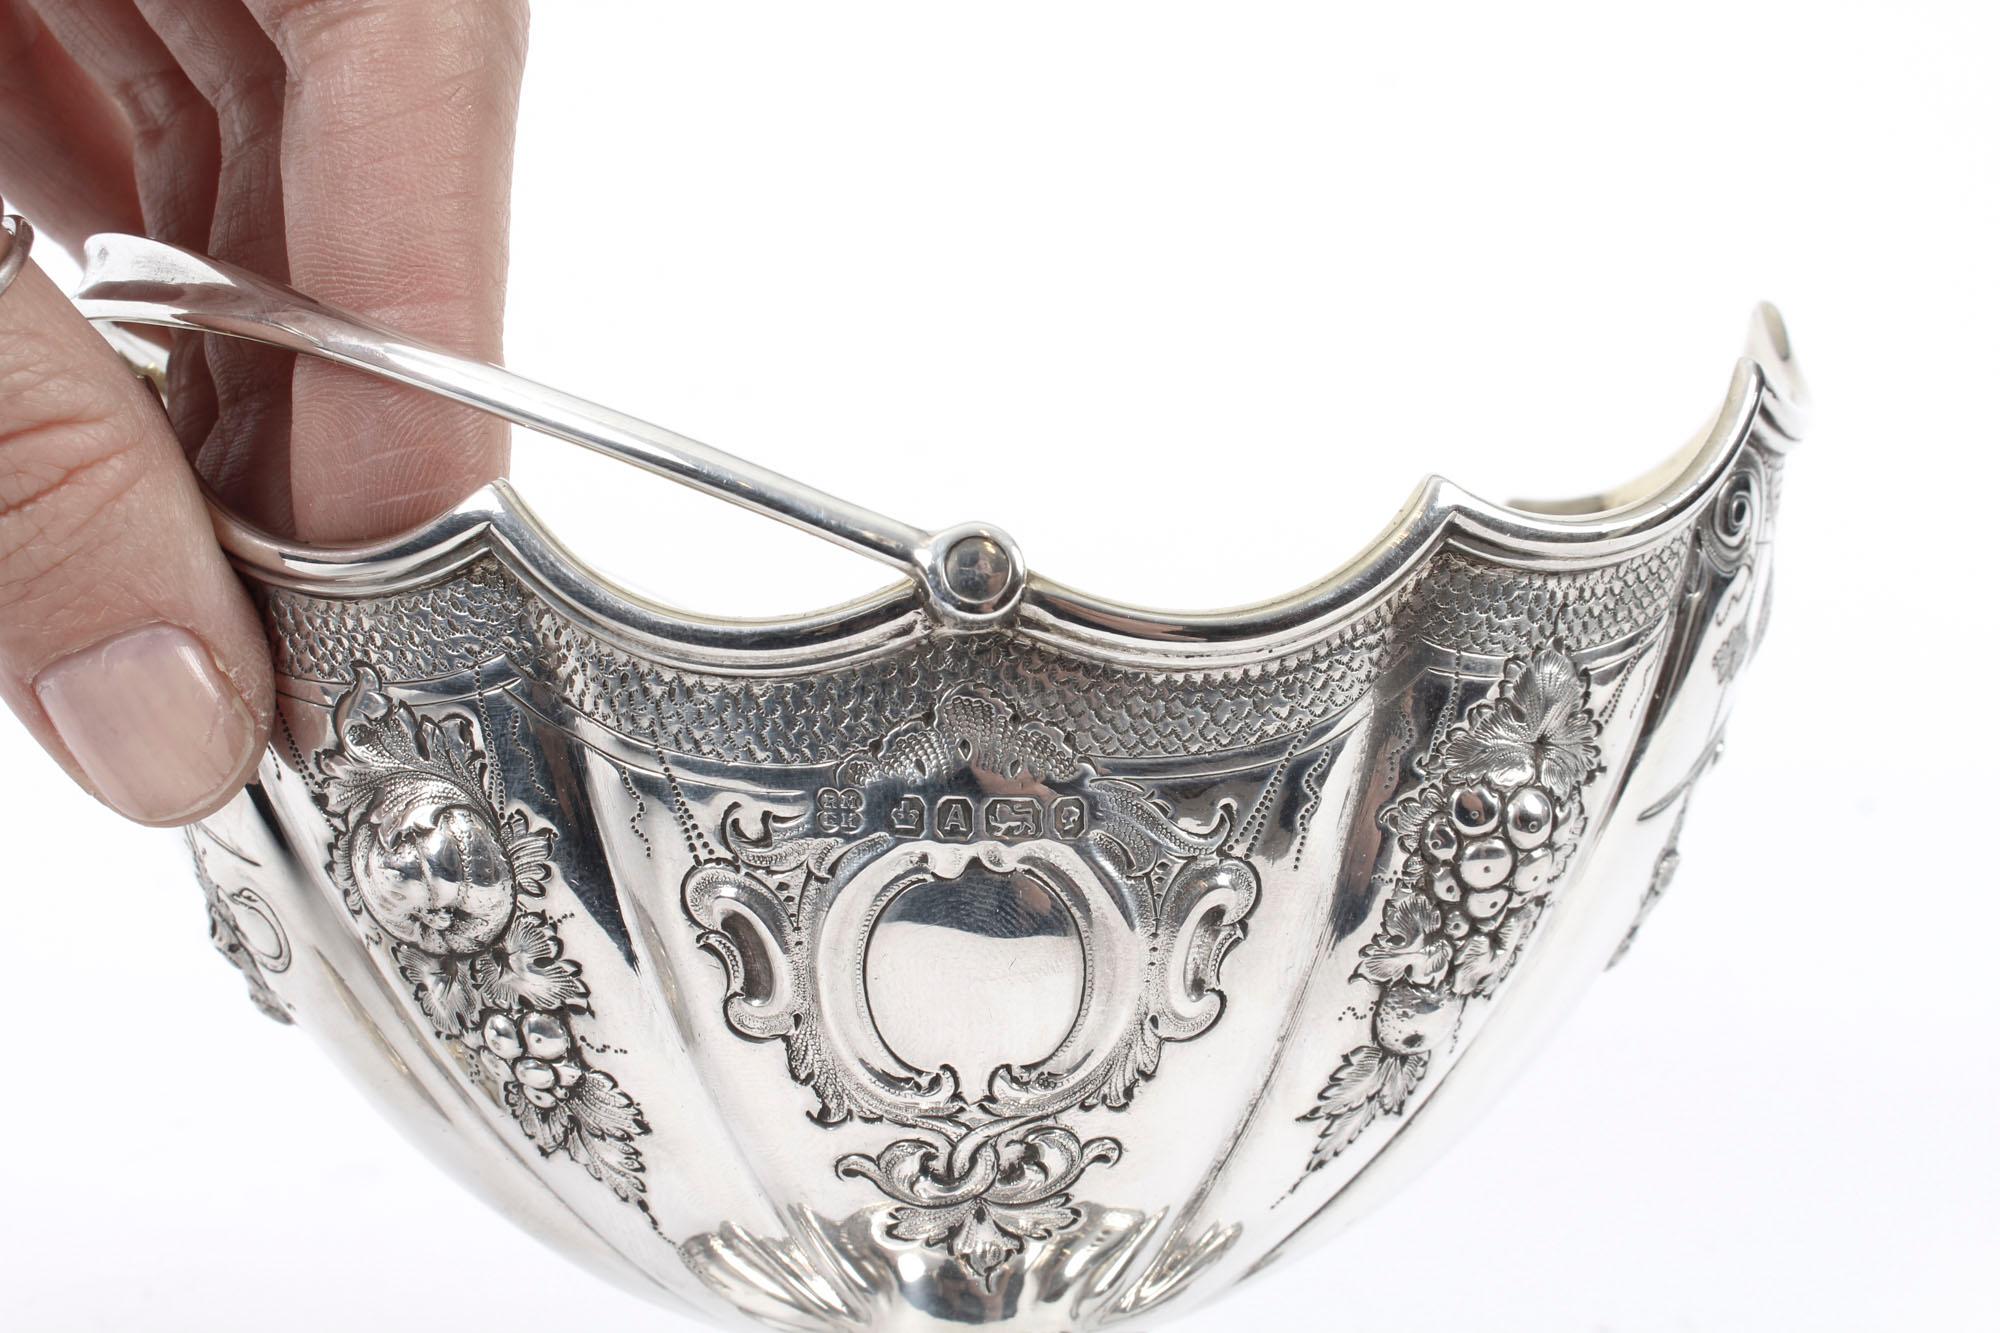 Antique Victorian Cased Sterling Silver Sugar Bowl & Sifter, 1868, 19th Century 9